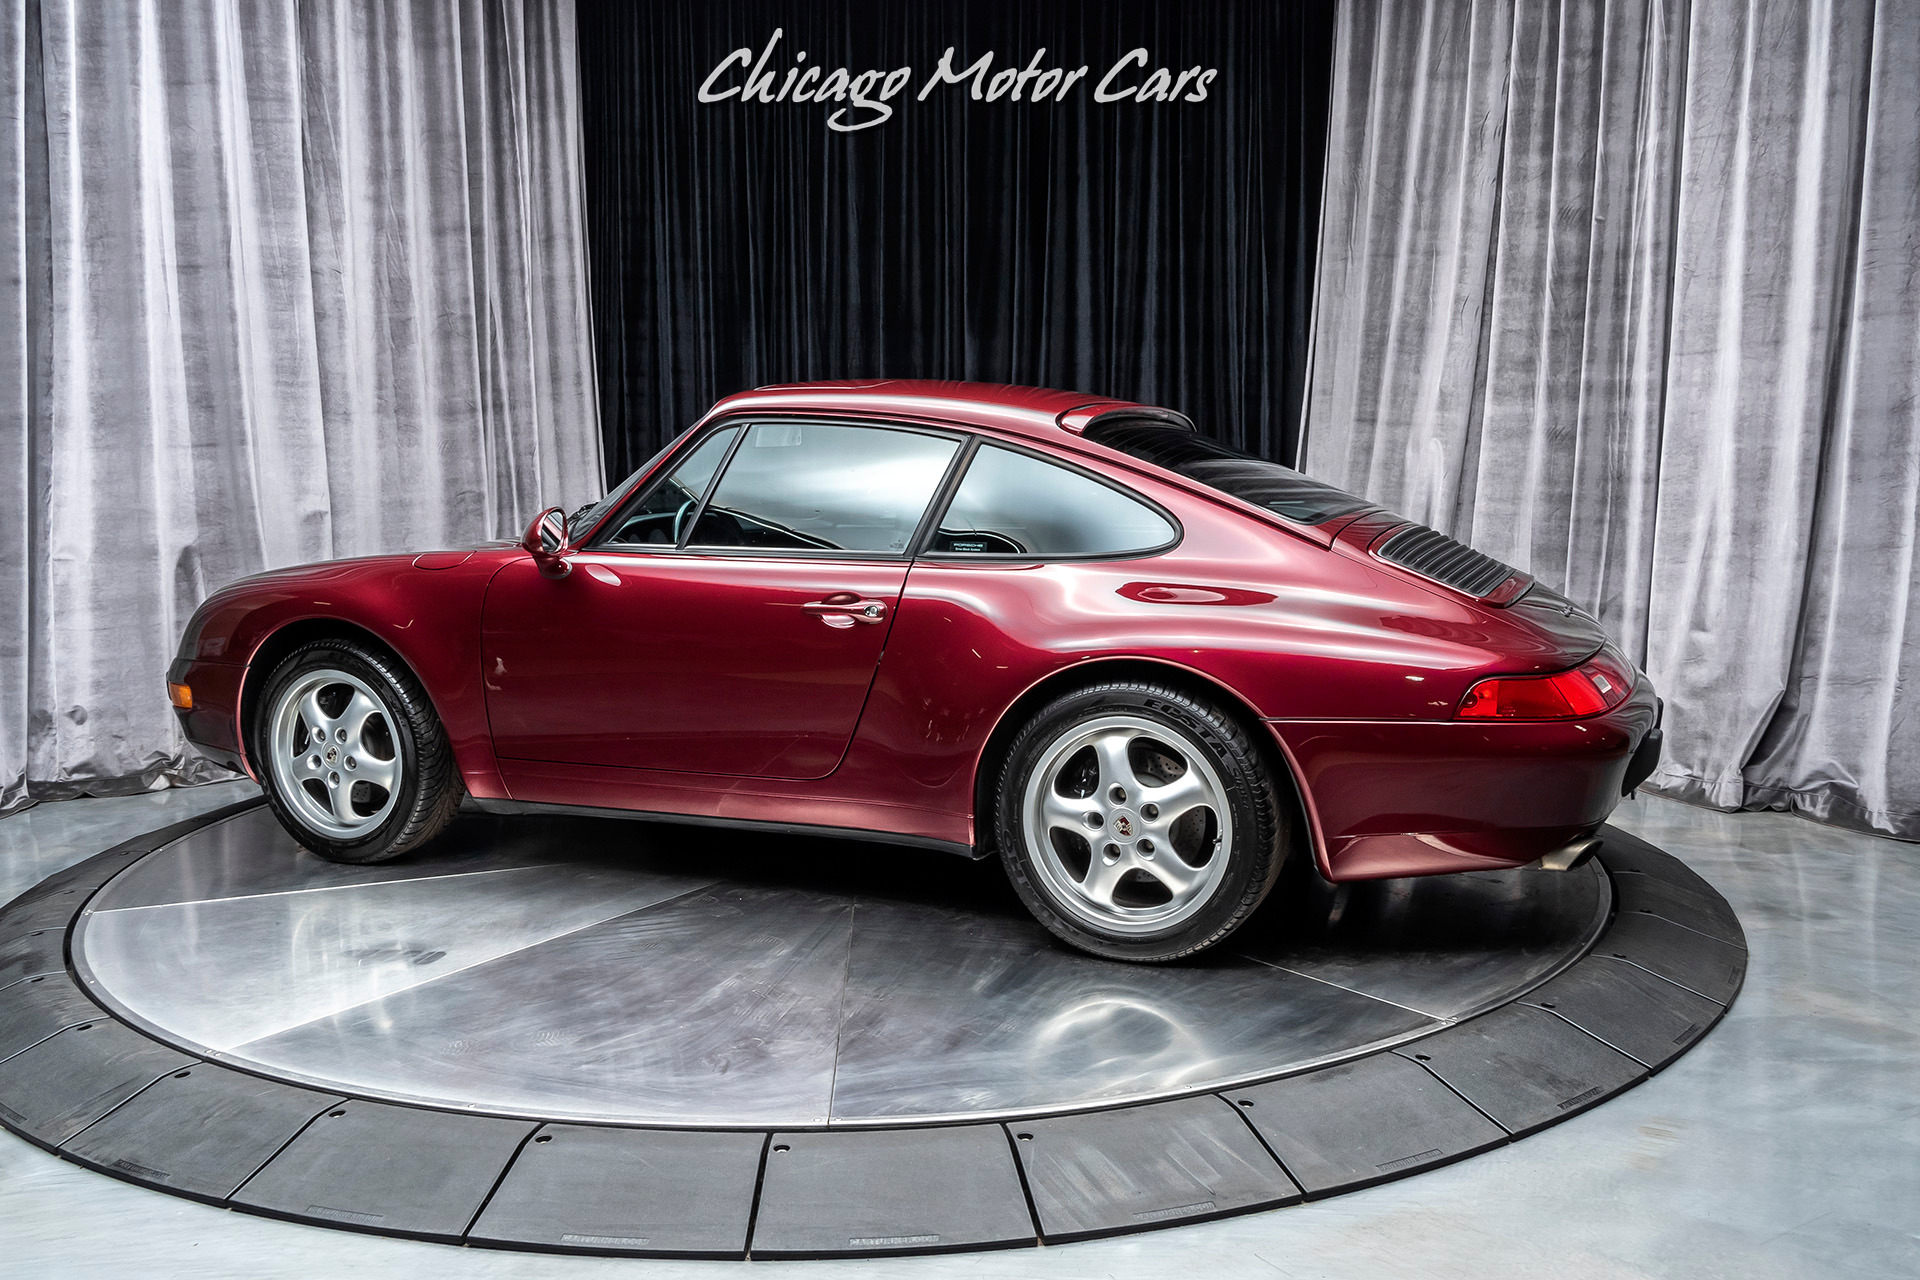 Used-1997-Porsche-911-Carrera-Coupe-6-Speed-Manual-Arena-Red-Metallic-Serviced